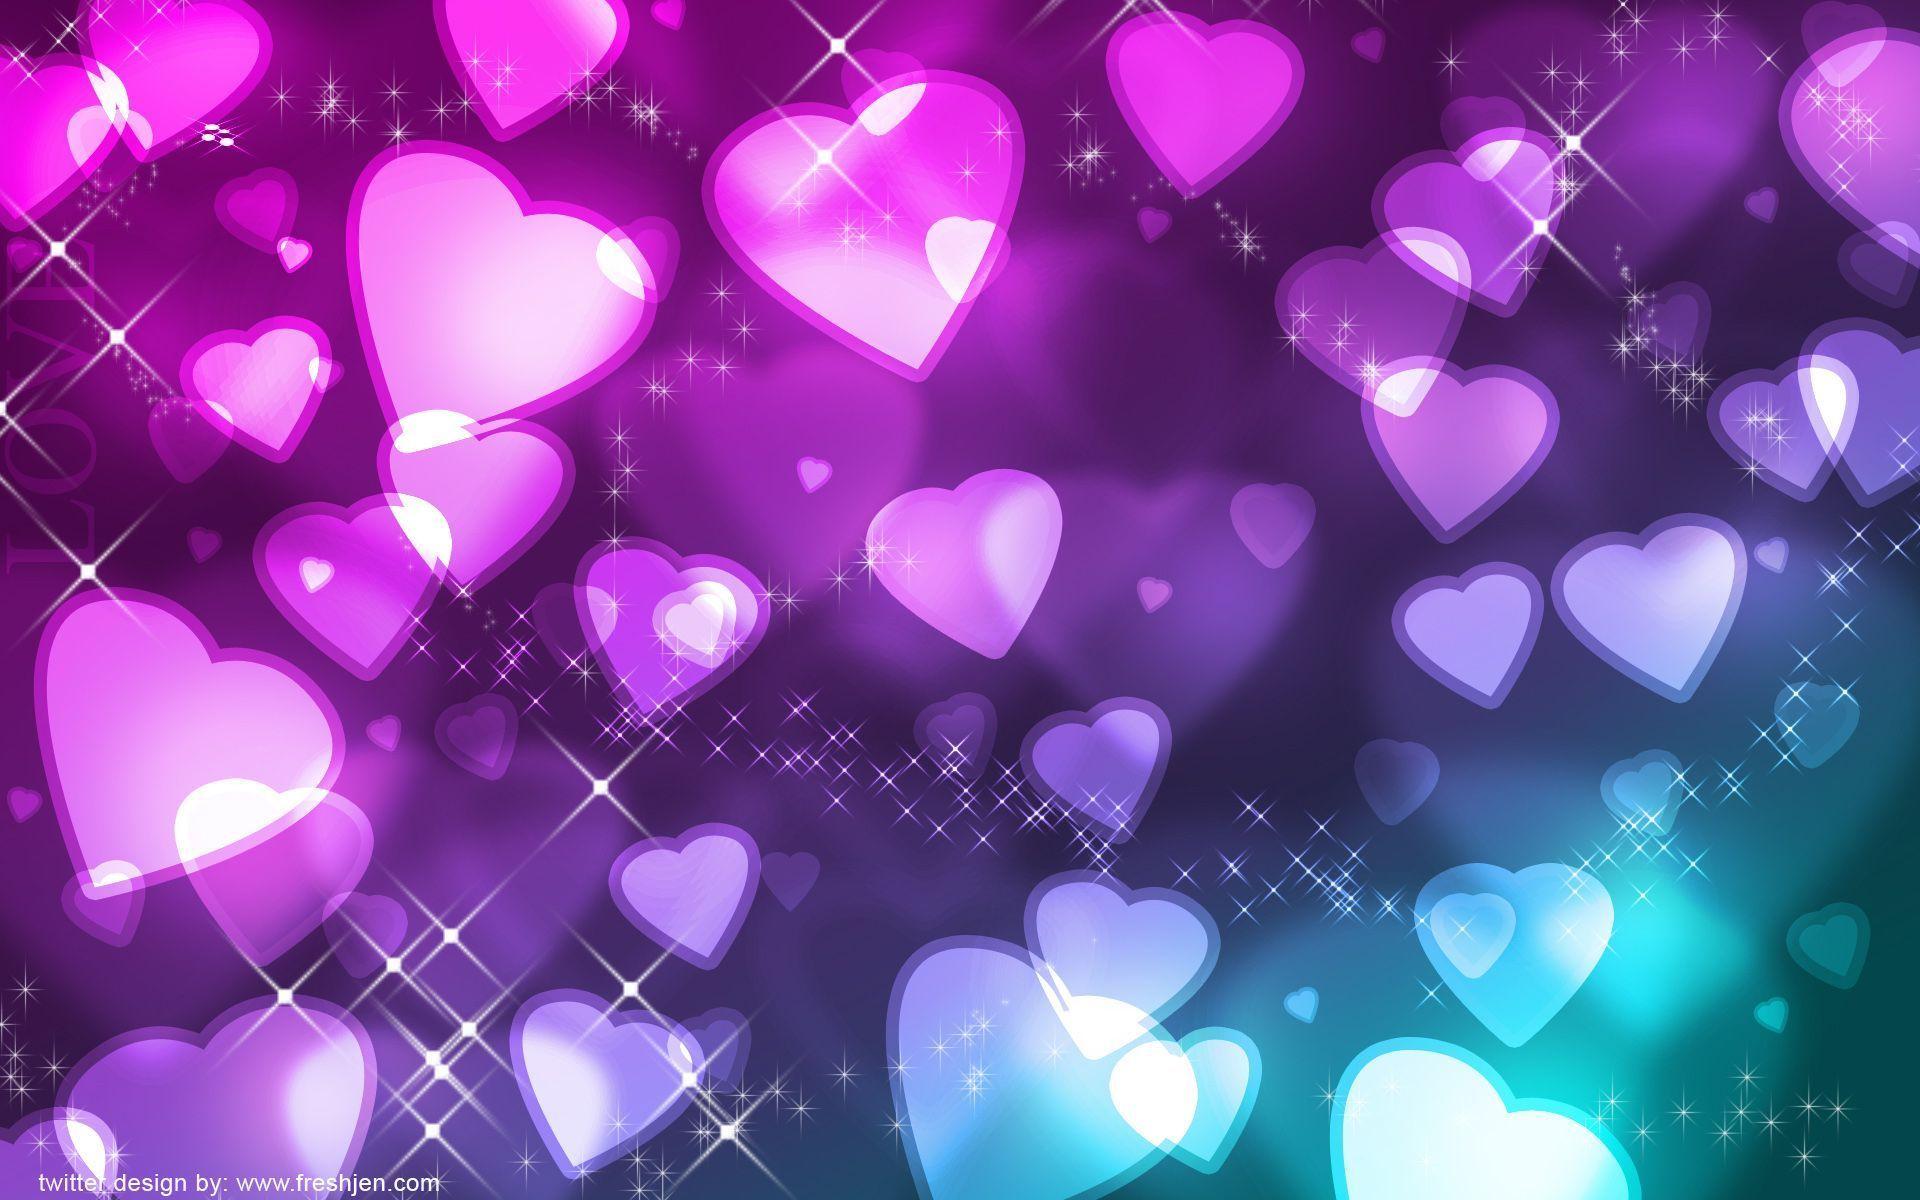 Cool Background Of Hearts Image Amp Pictures Becuo